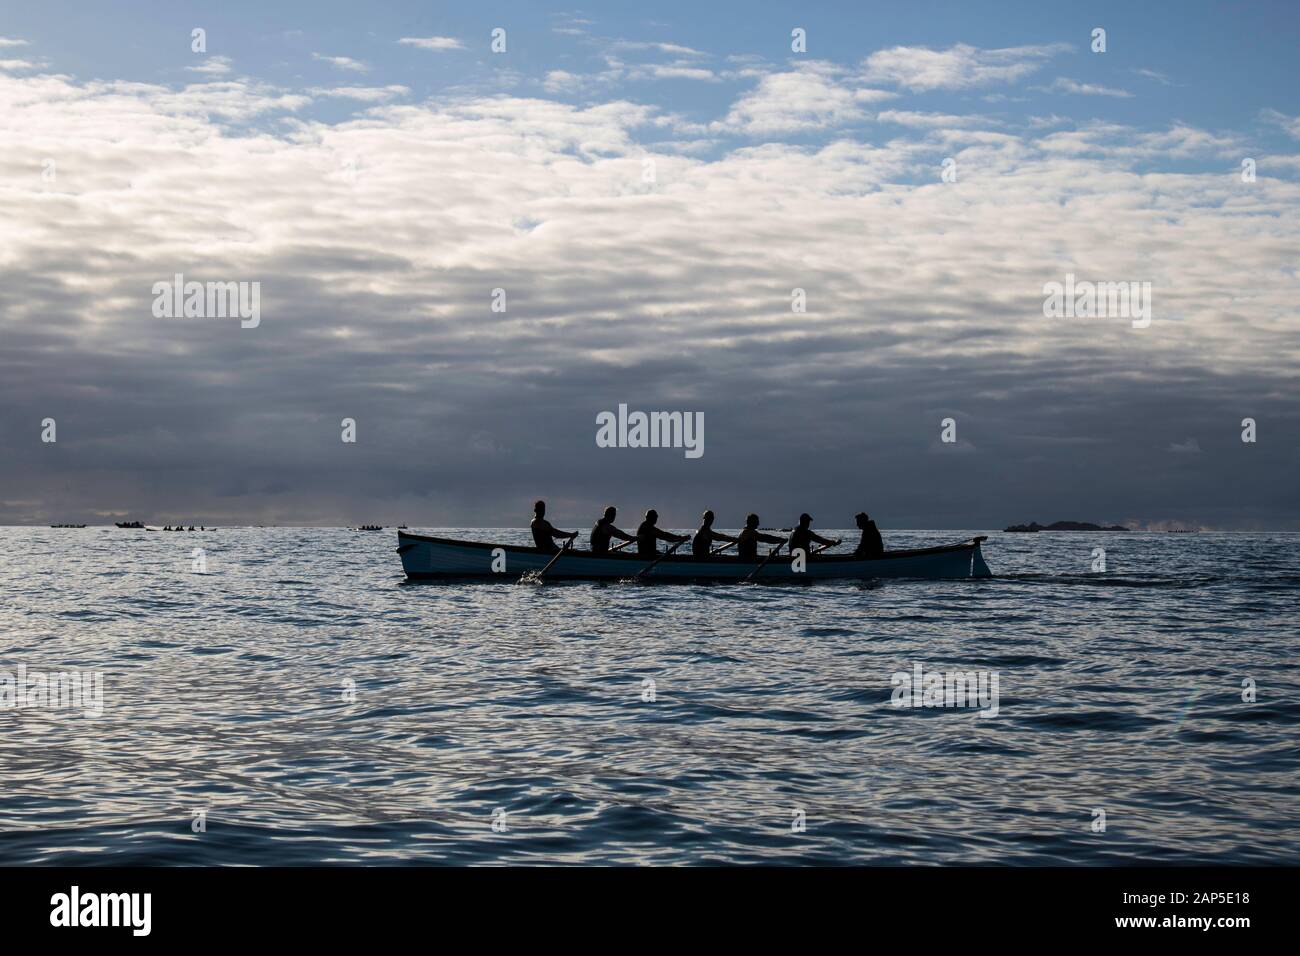 A group of rowers in a pilot gig on the Atlantic Ocean Stock Photo